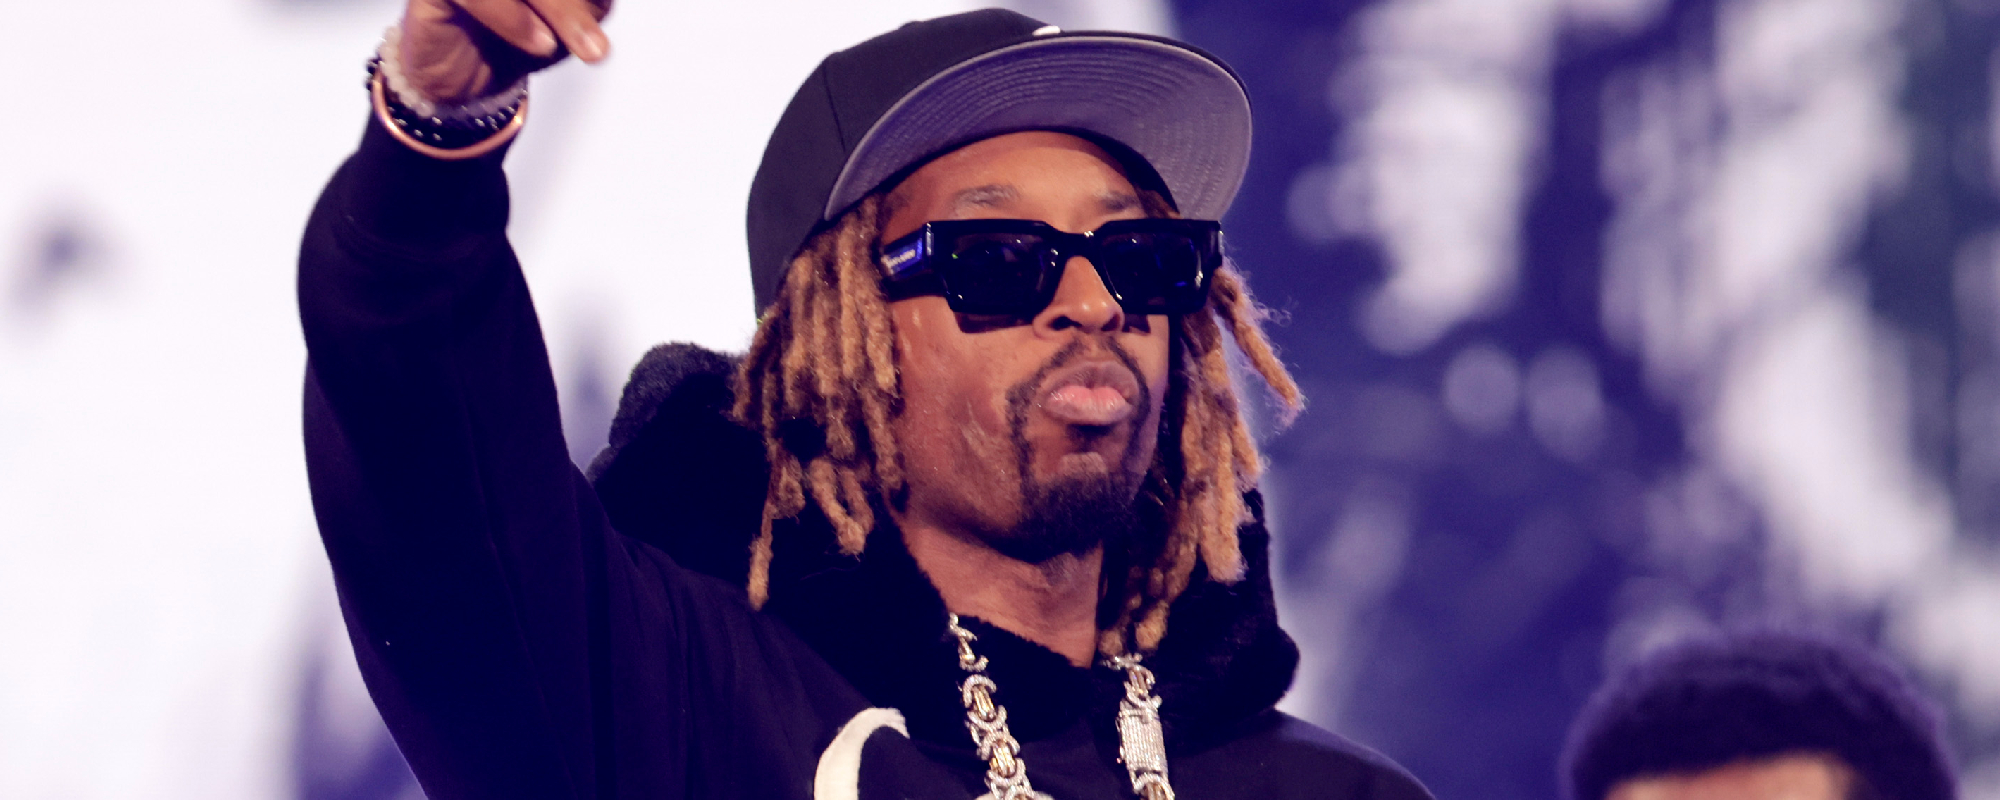 Lil Jon Says Justin Bieber “Wasn’t Ready” for the “Responsibility” After Sitting Out Super Bowl Halftime Performance